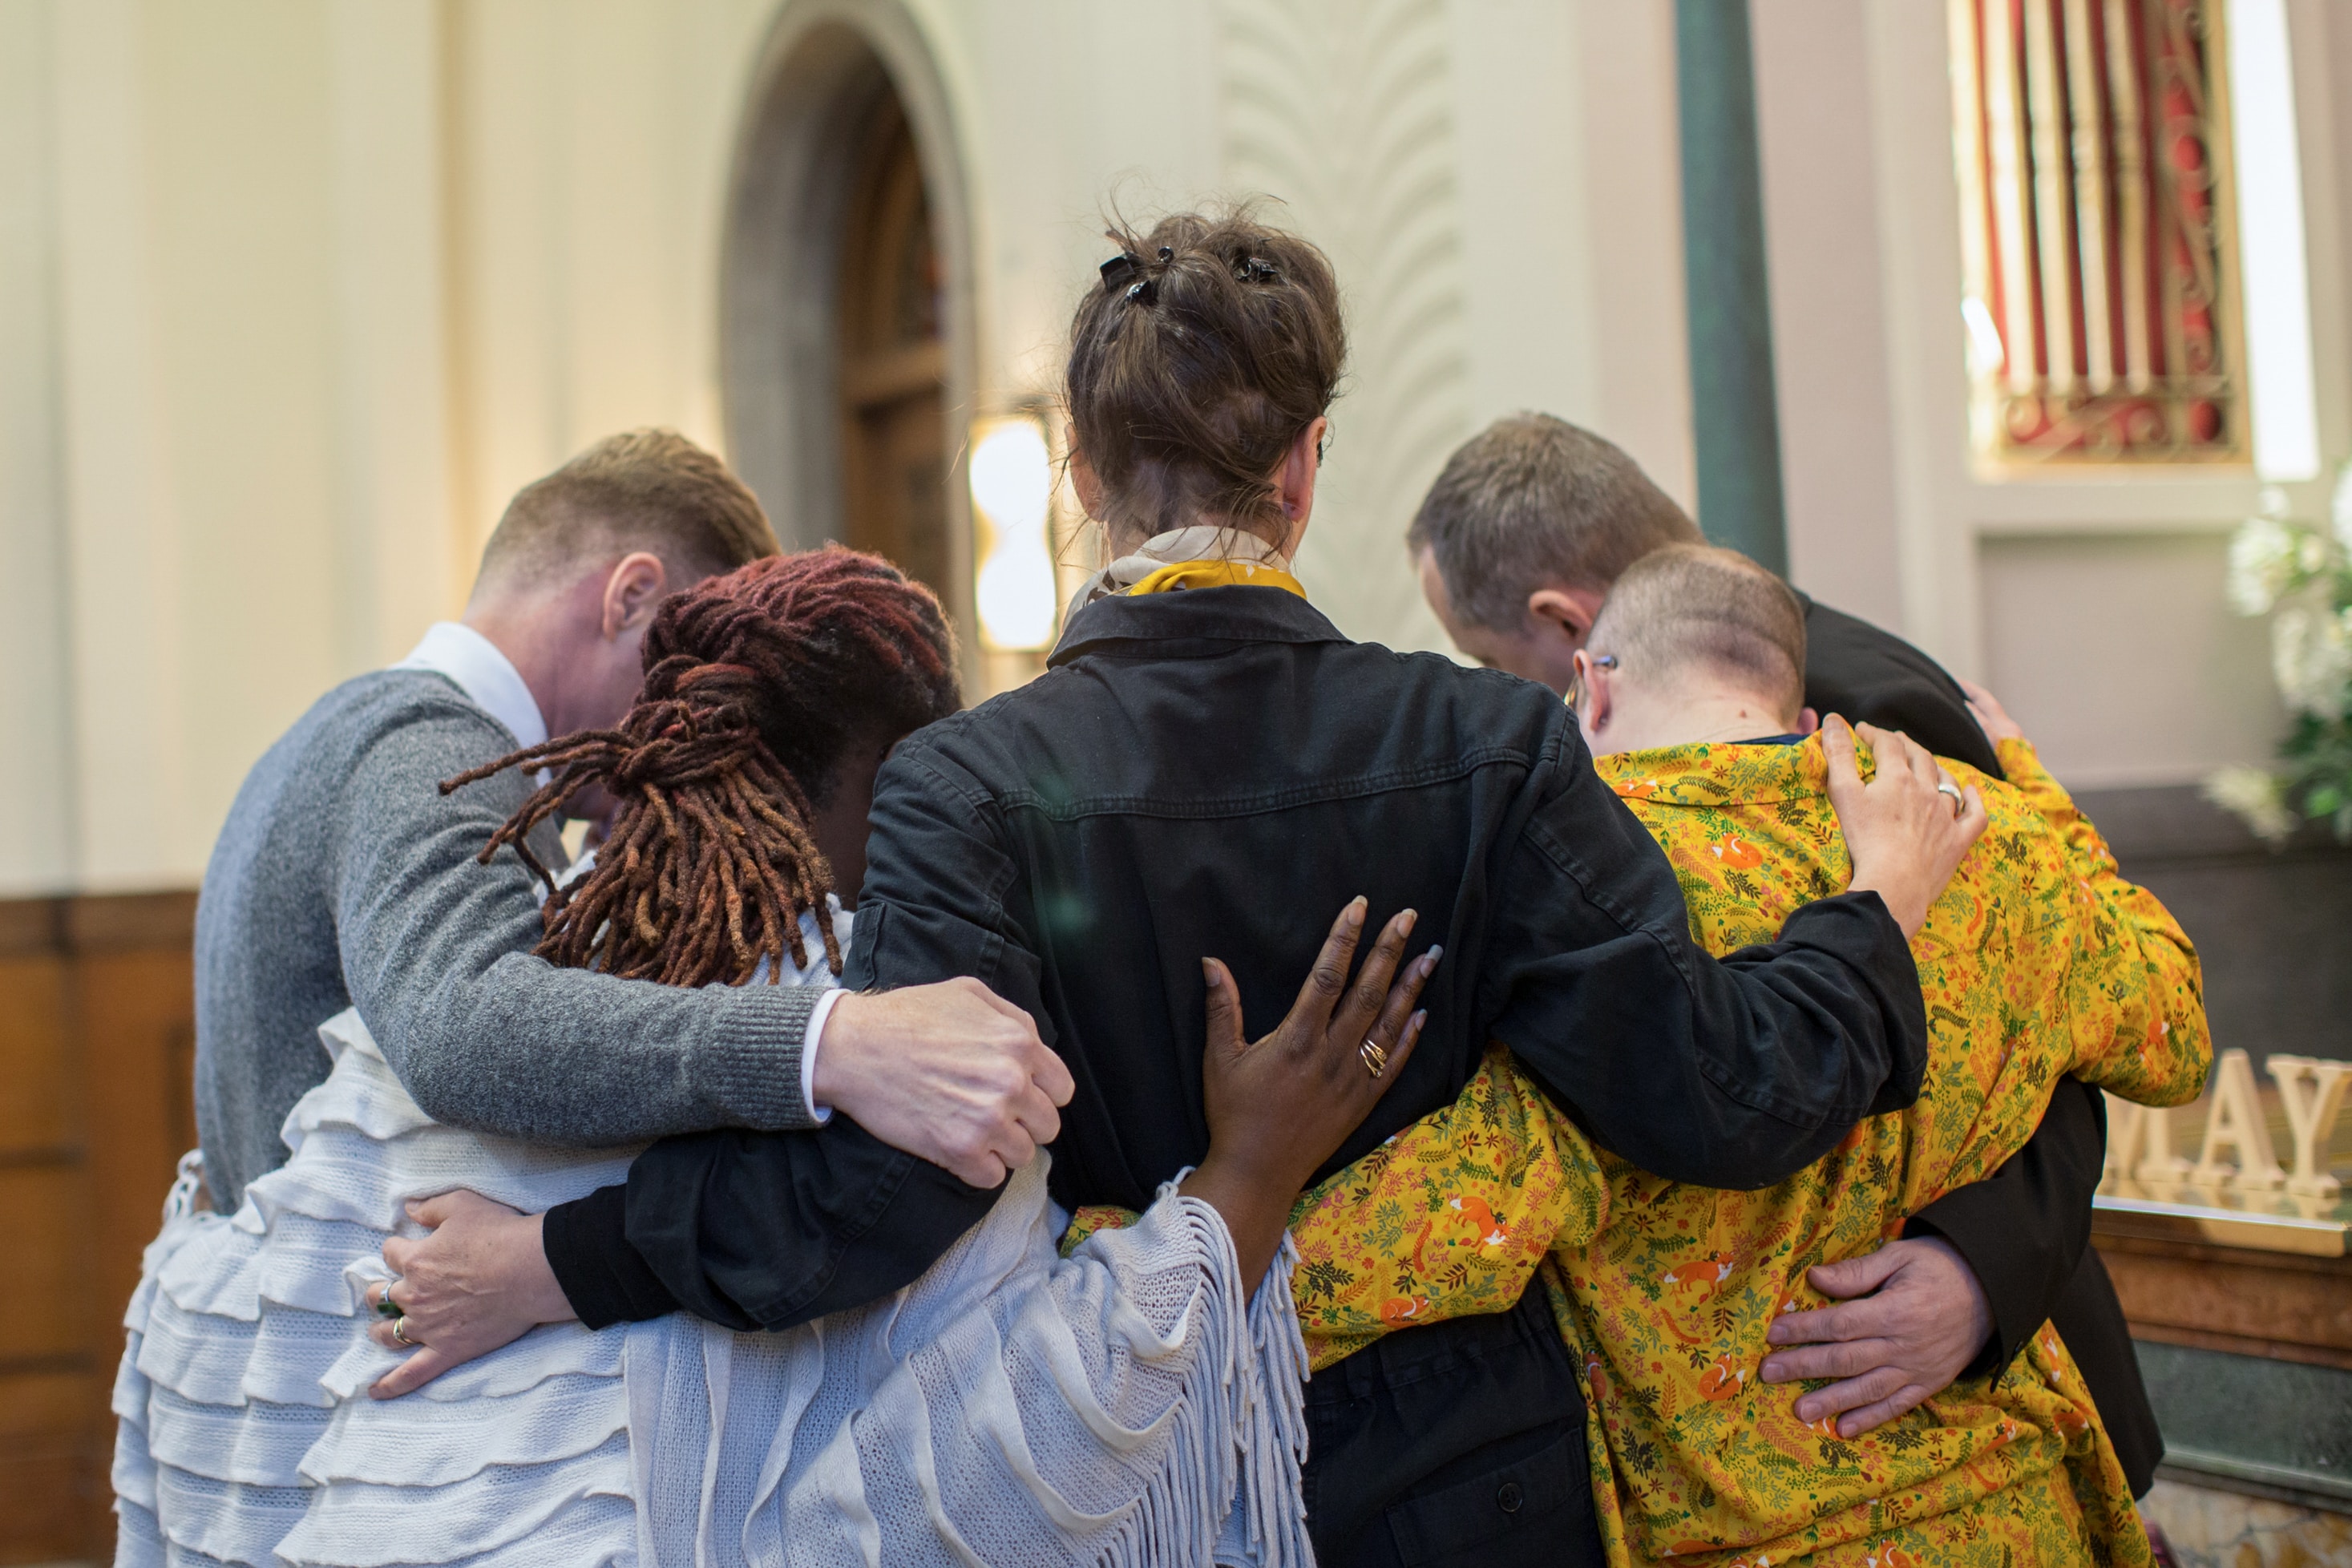 A group of people hugging at a funeral service